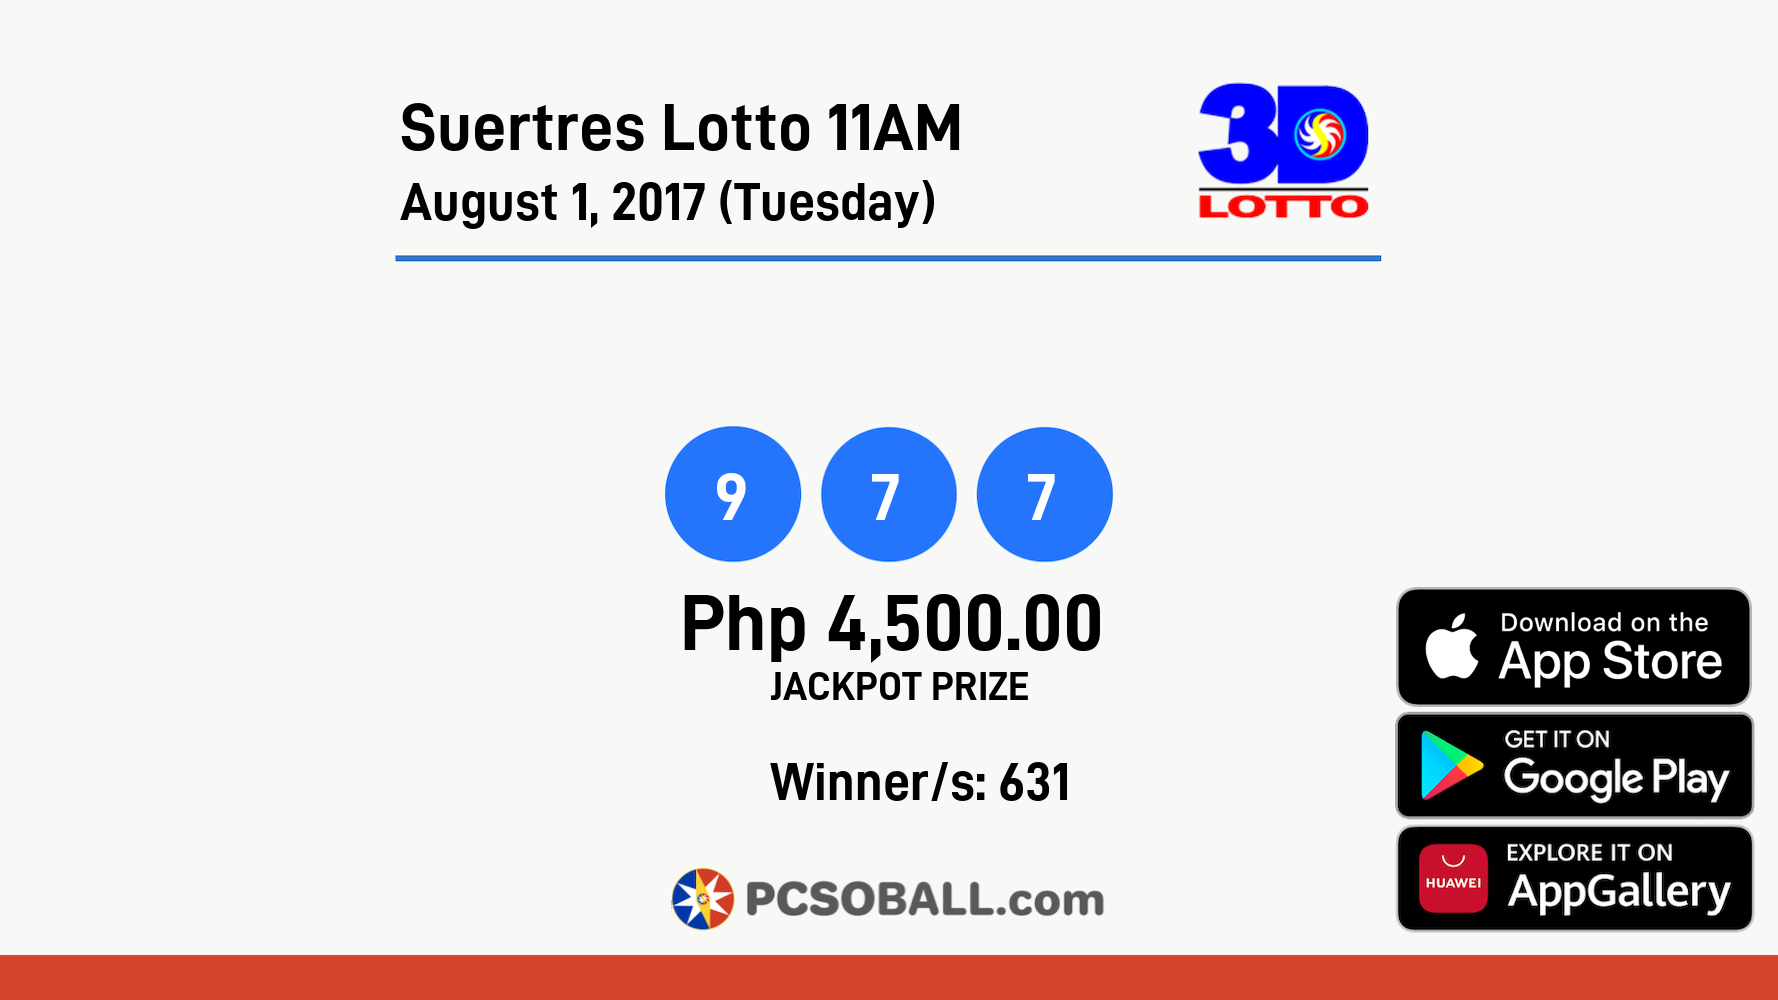 Suertres Lotto 11AM August 1, 2017 (Tuesday) Result